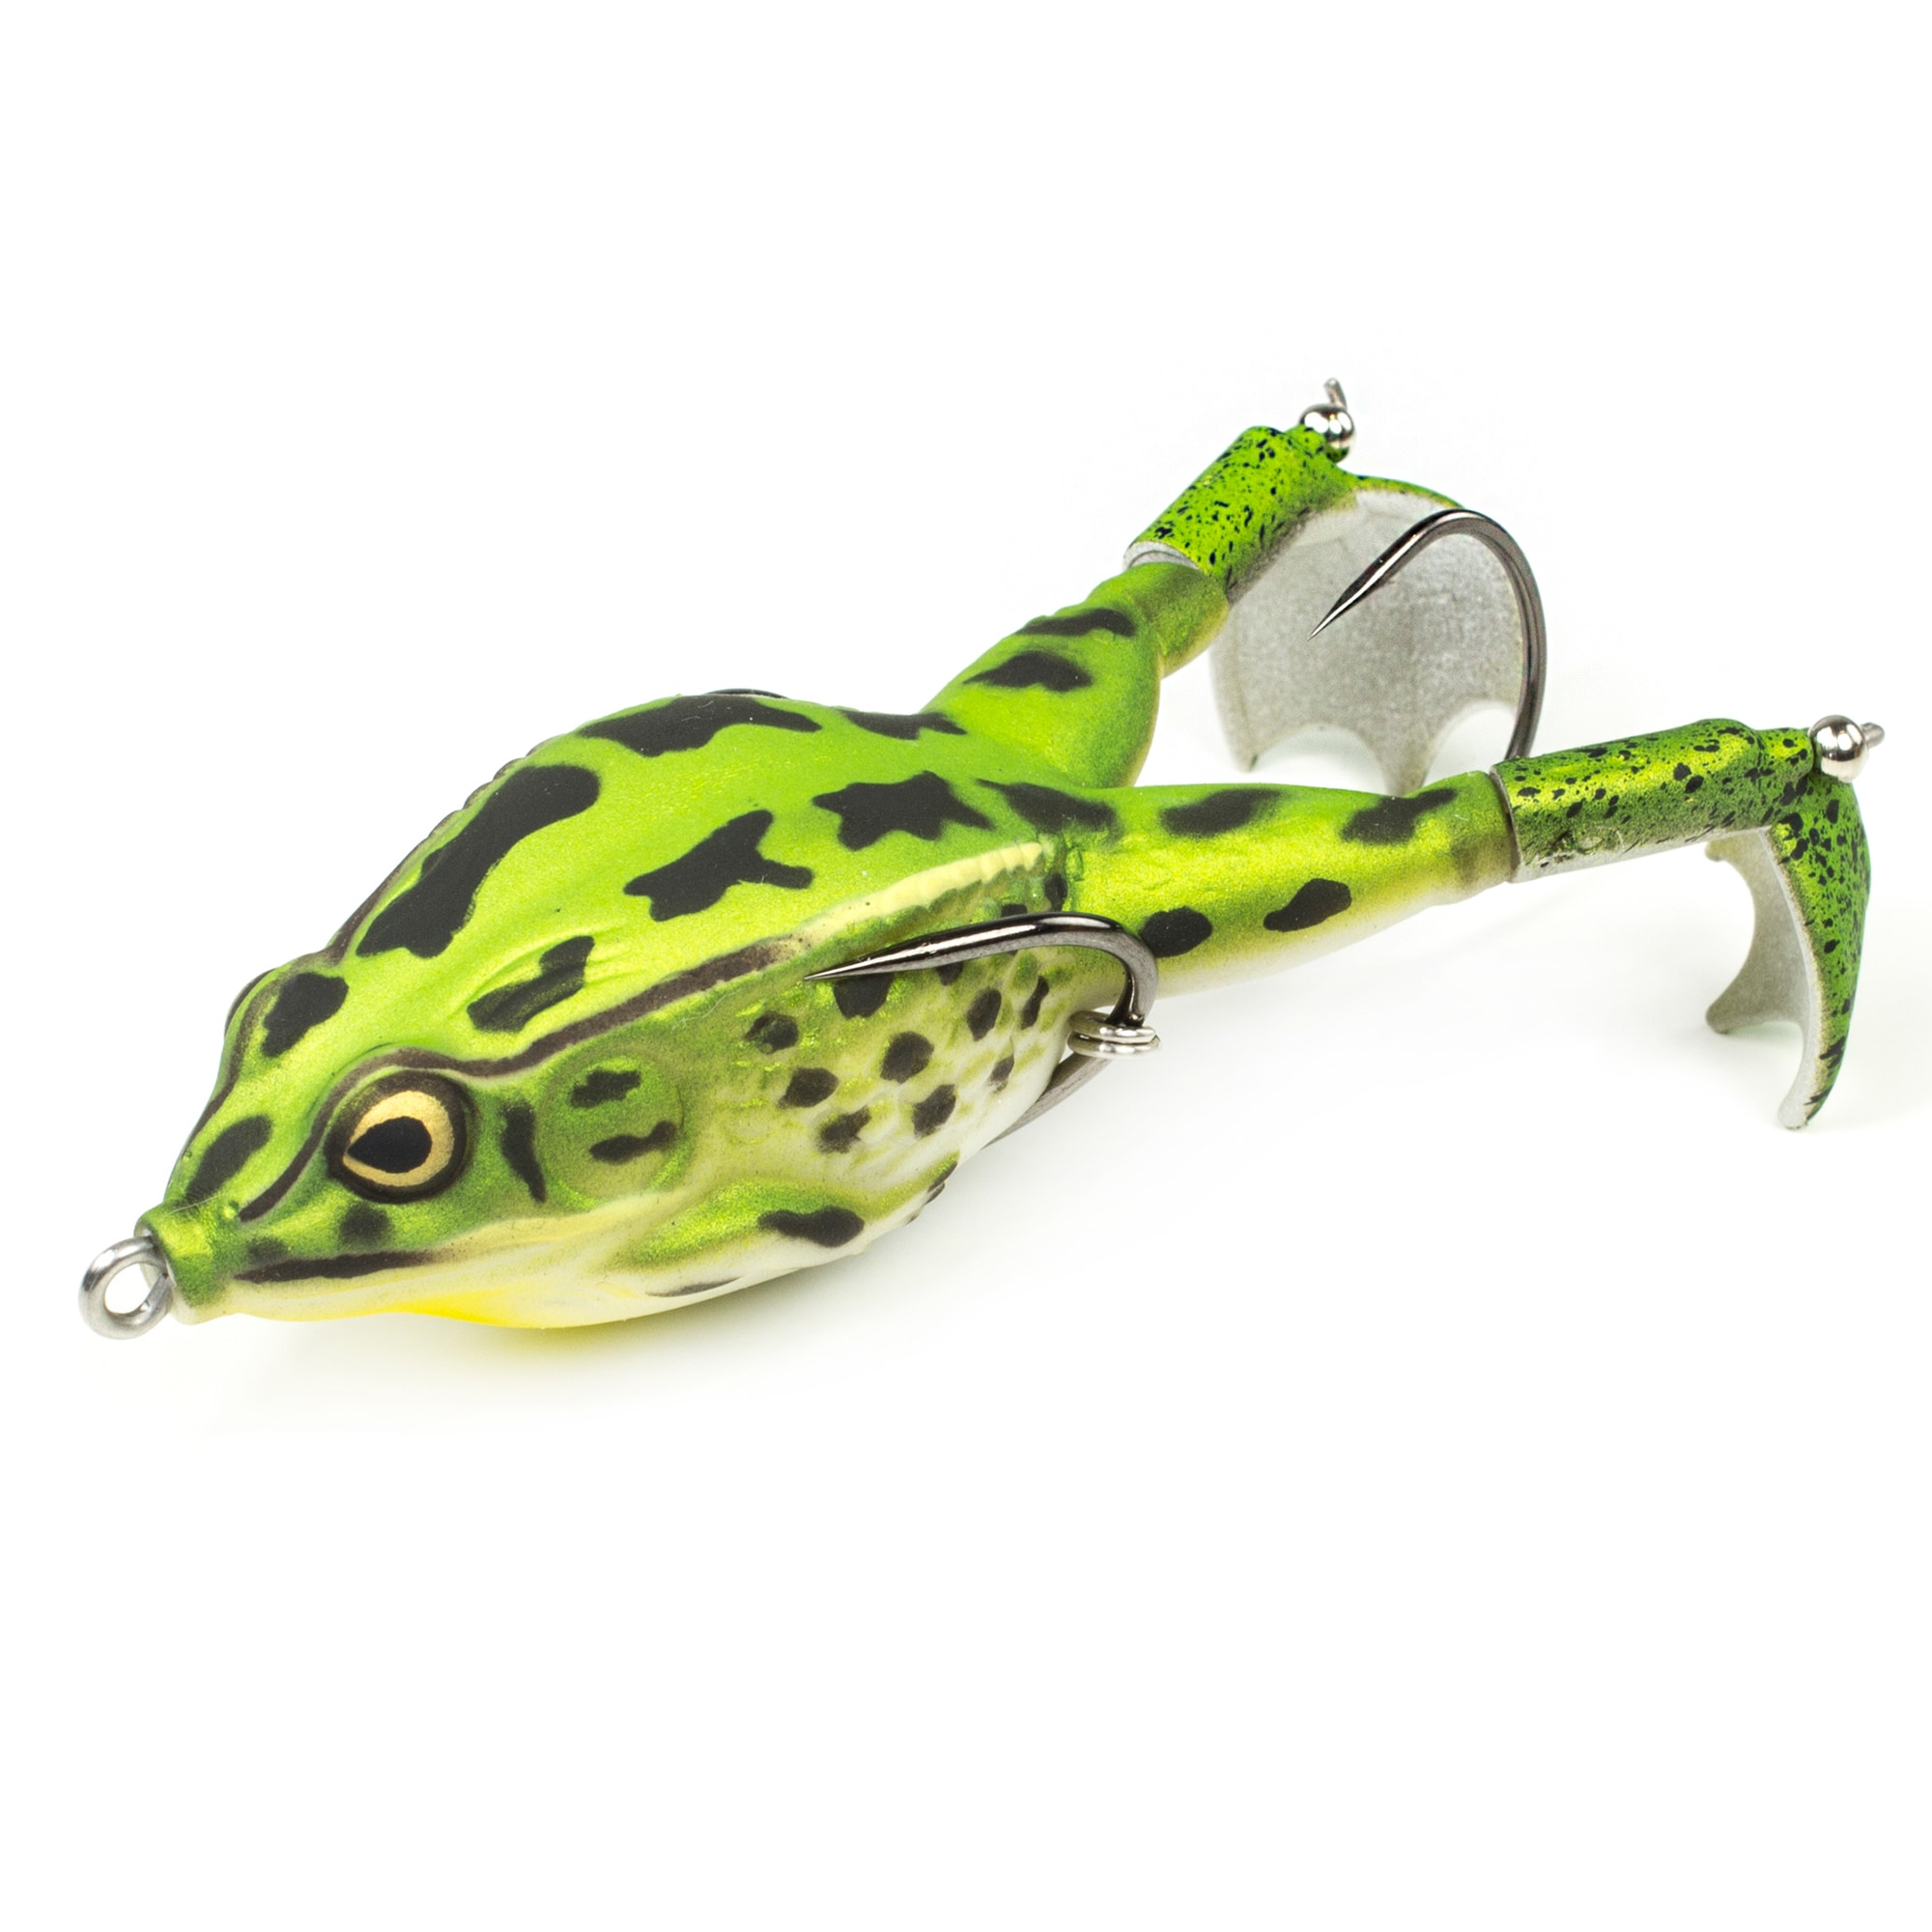 LUNKERHUNT Prop Turtle Combo of hollow bodied soft lure Line Tool